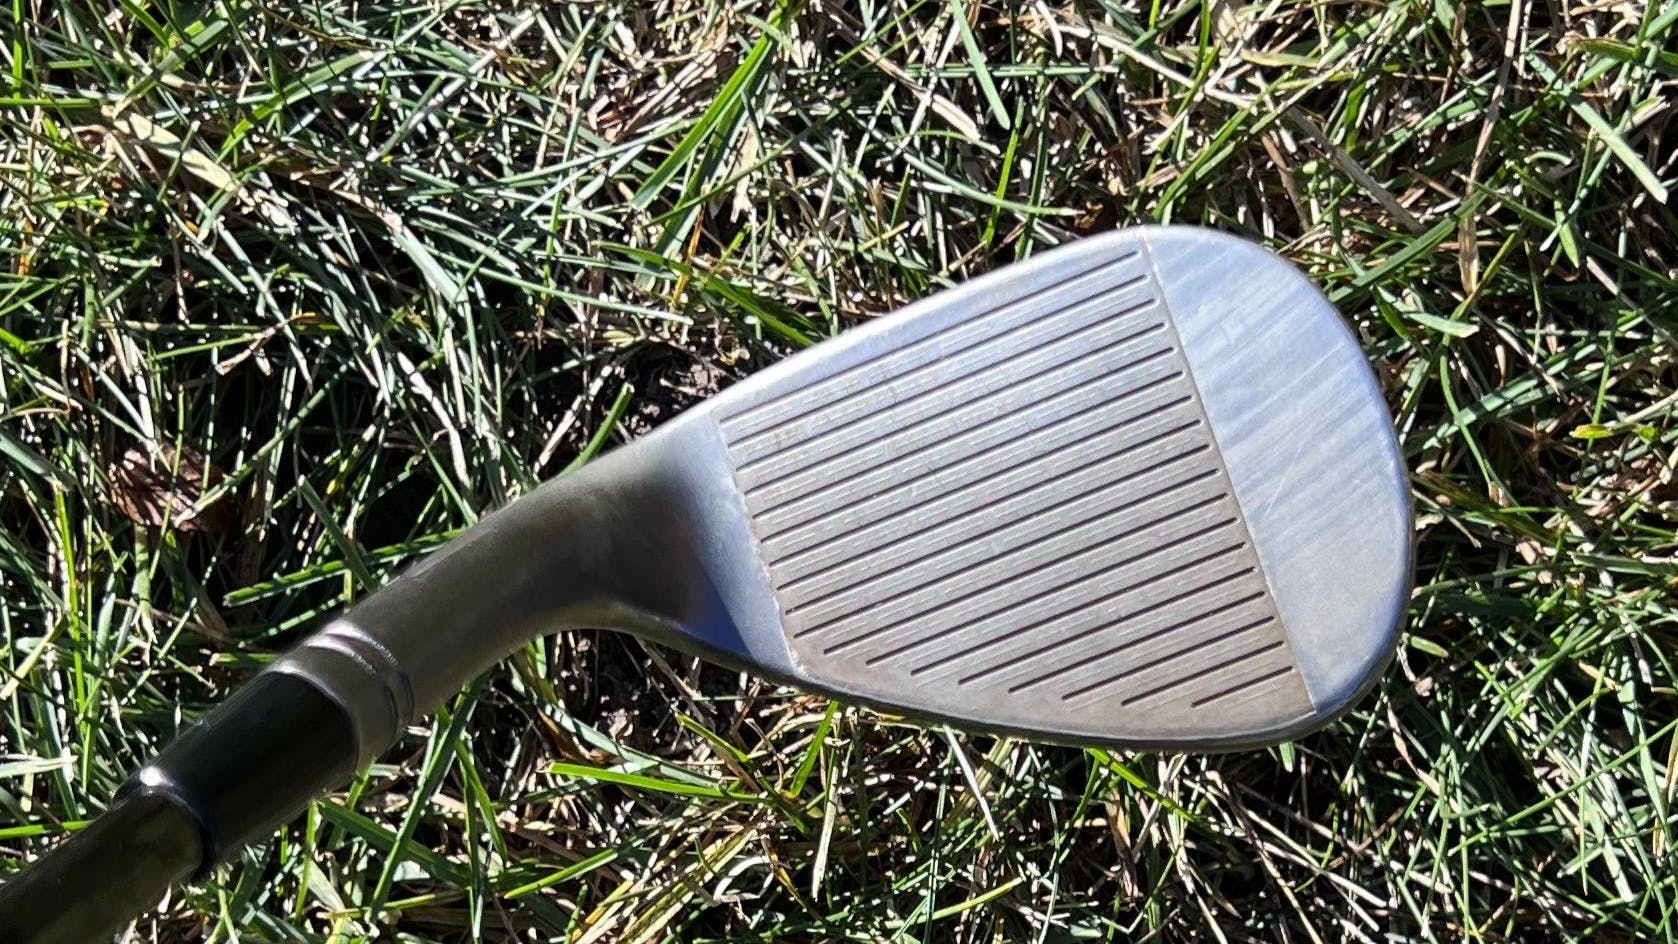 Face of the TaylorMade Hi-Toe 3 Wedge.